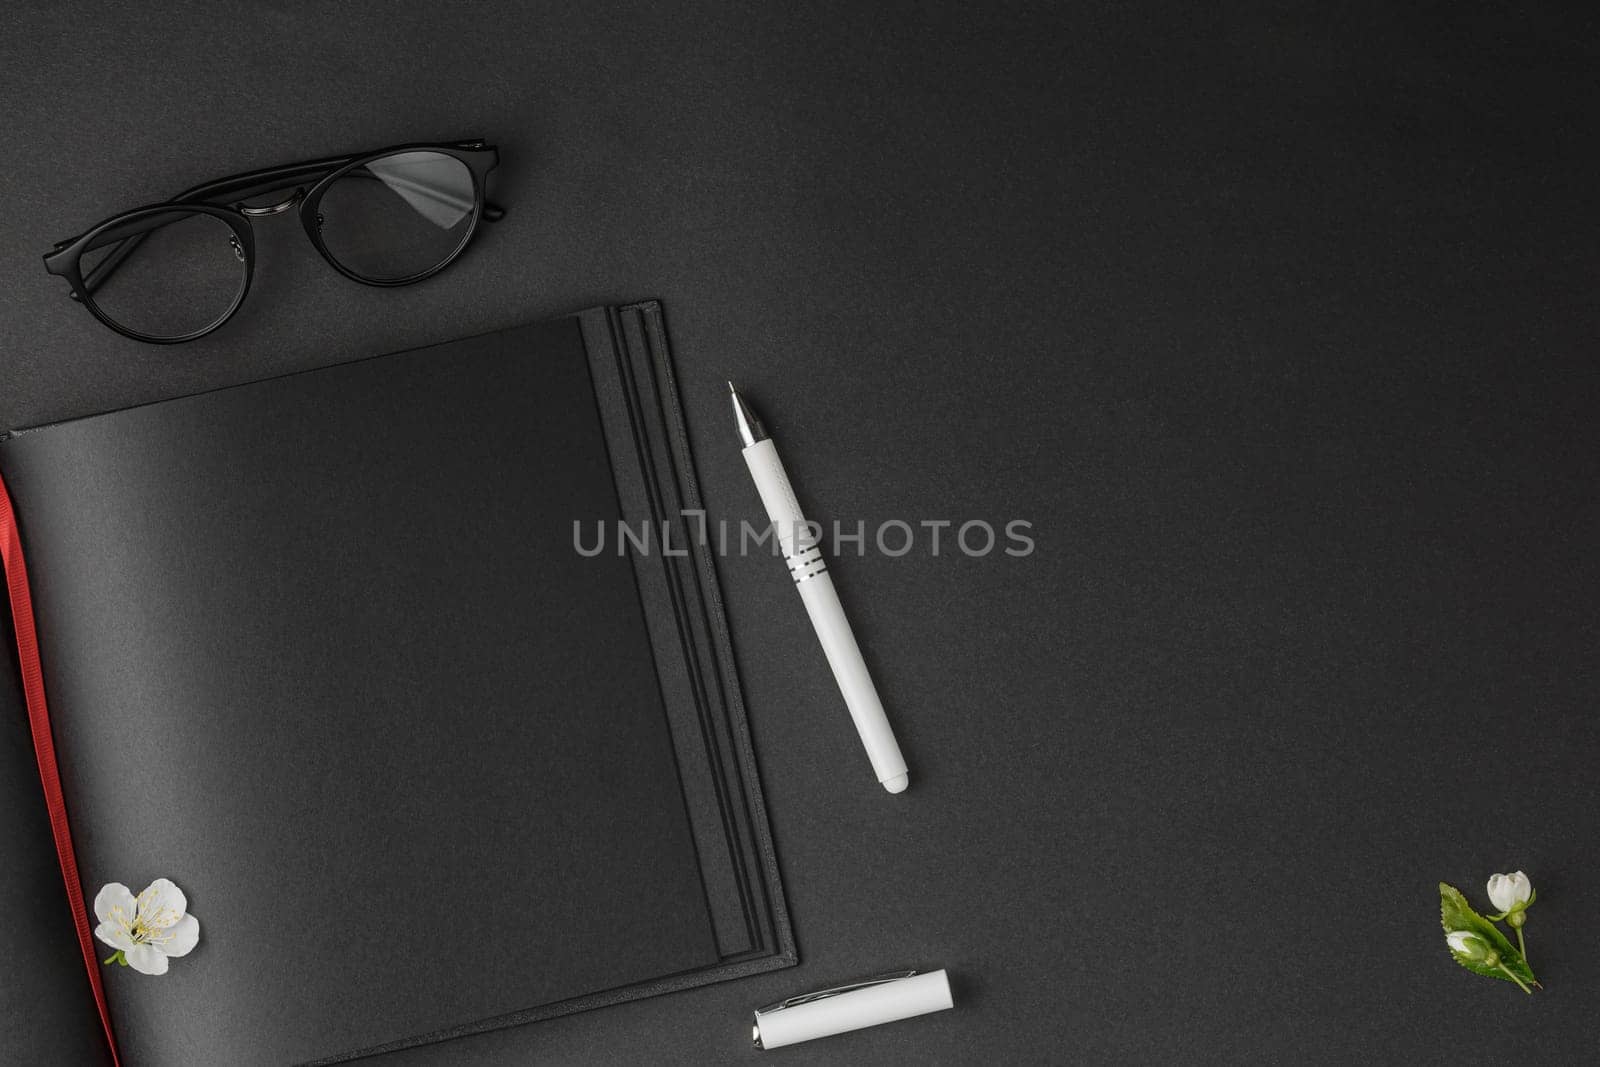 Notepad, pen and glasses with white flowers. by alexxndr